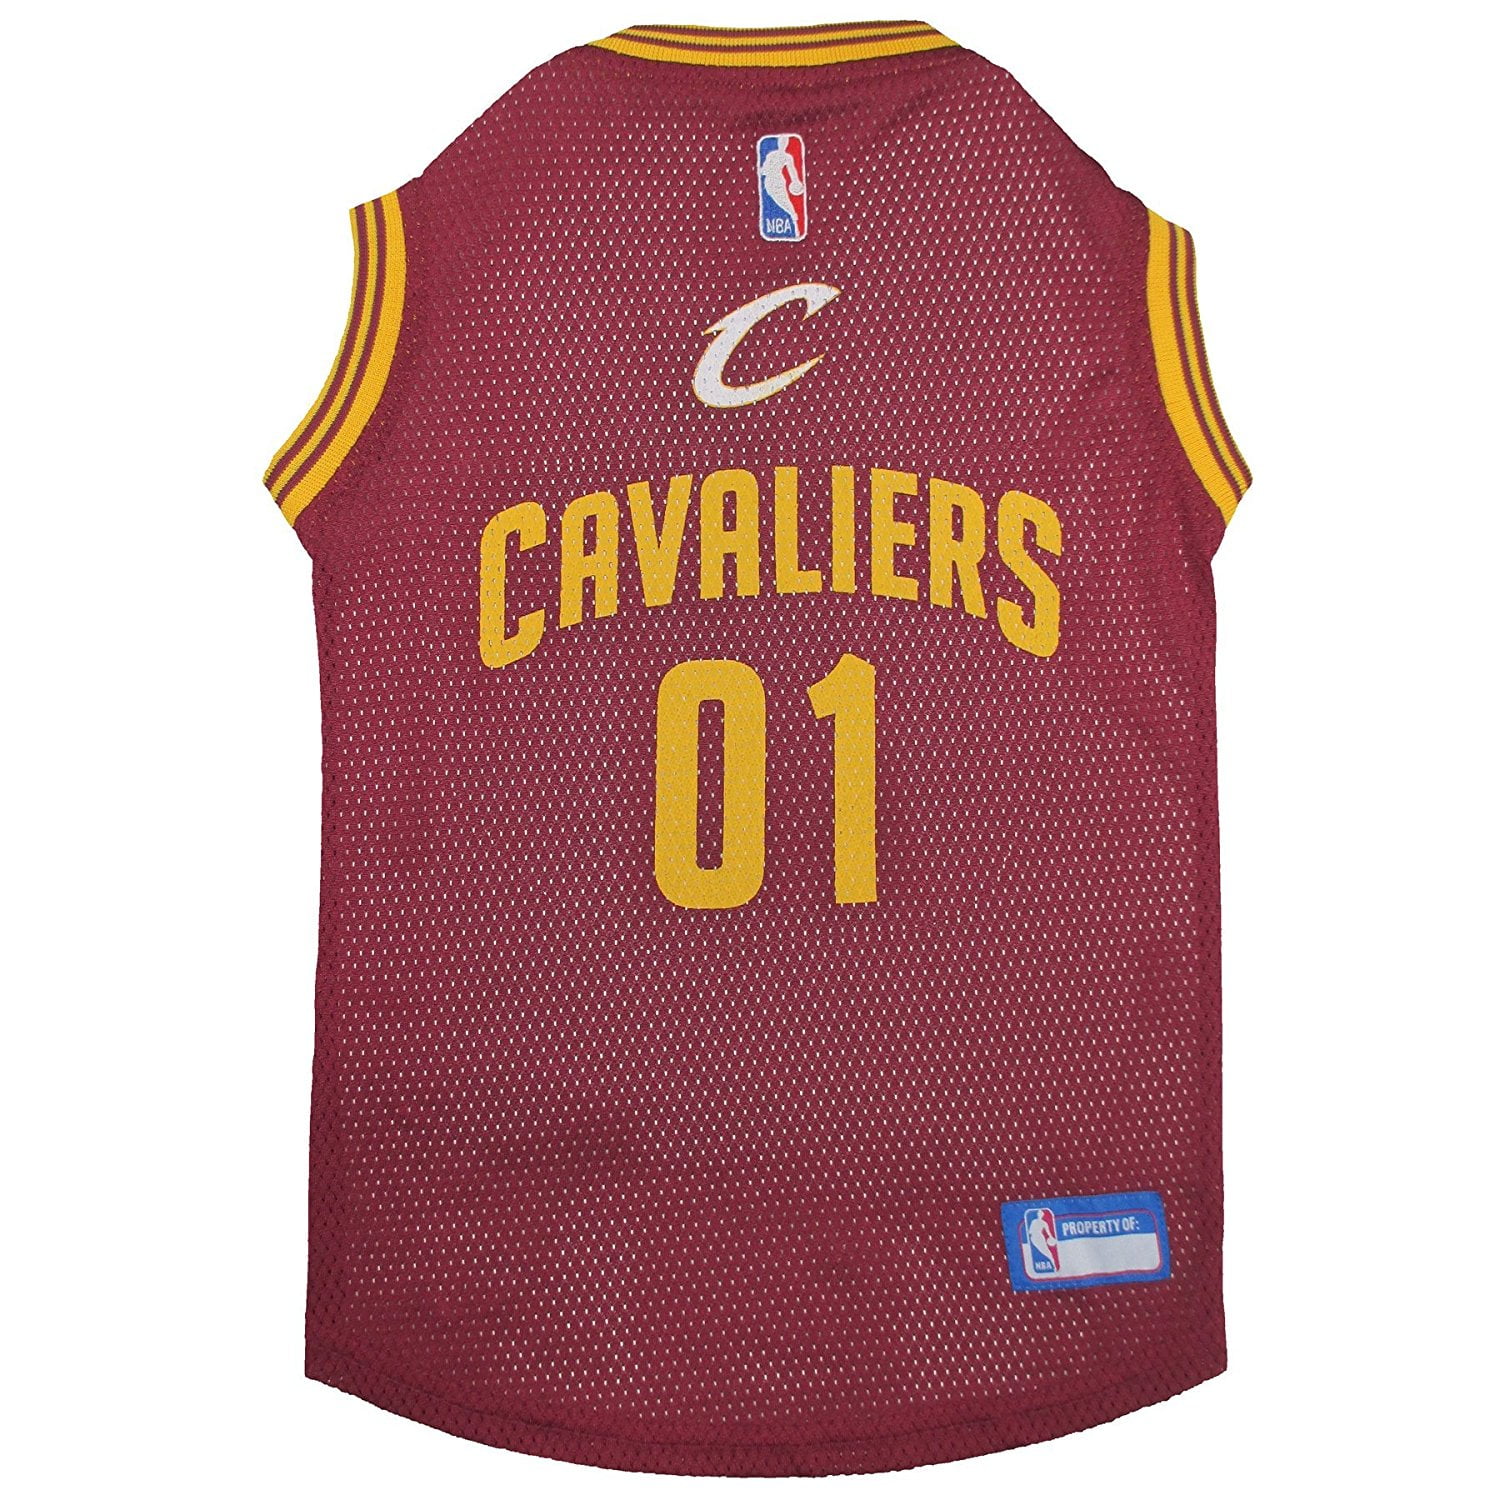 Cavs Officially Release The Land City Edition Uniforms